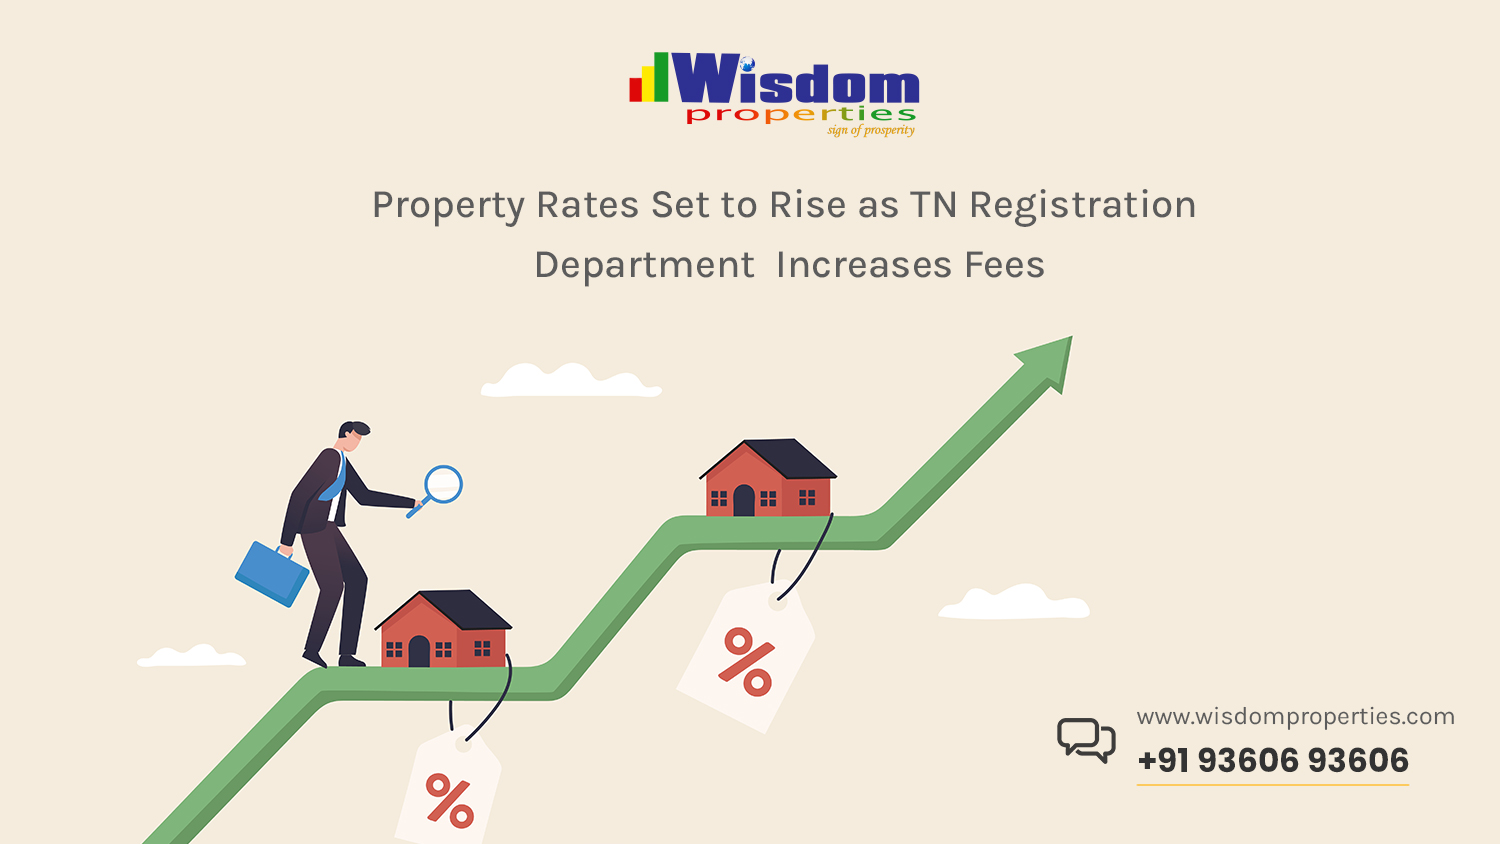 TN registration department hikes fee, property rates to go up